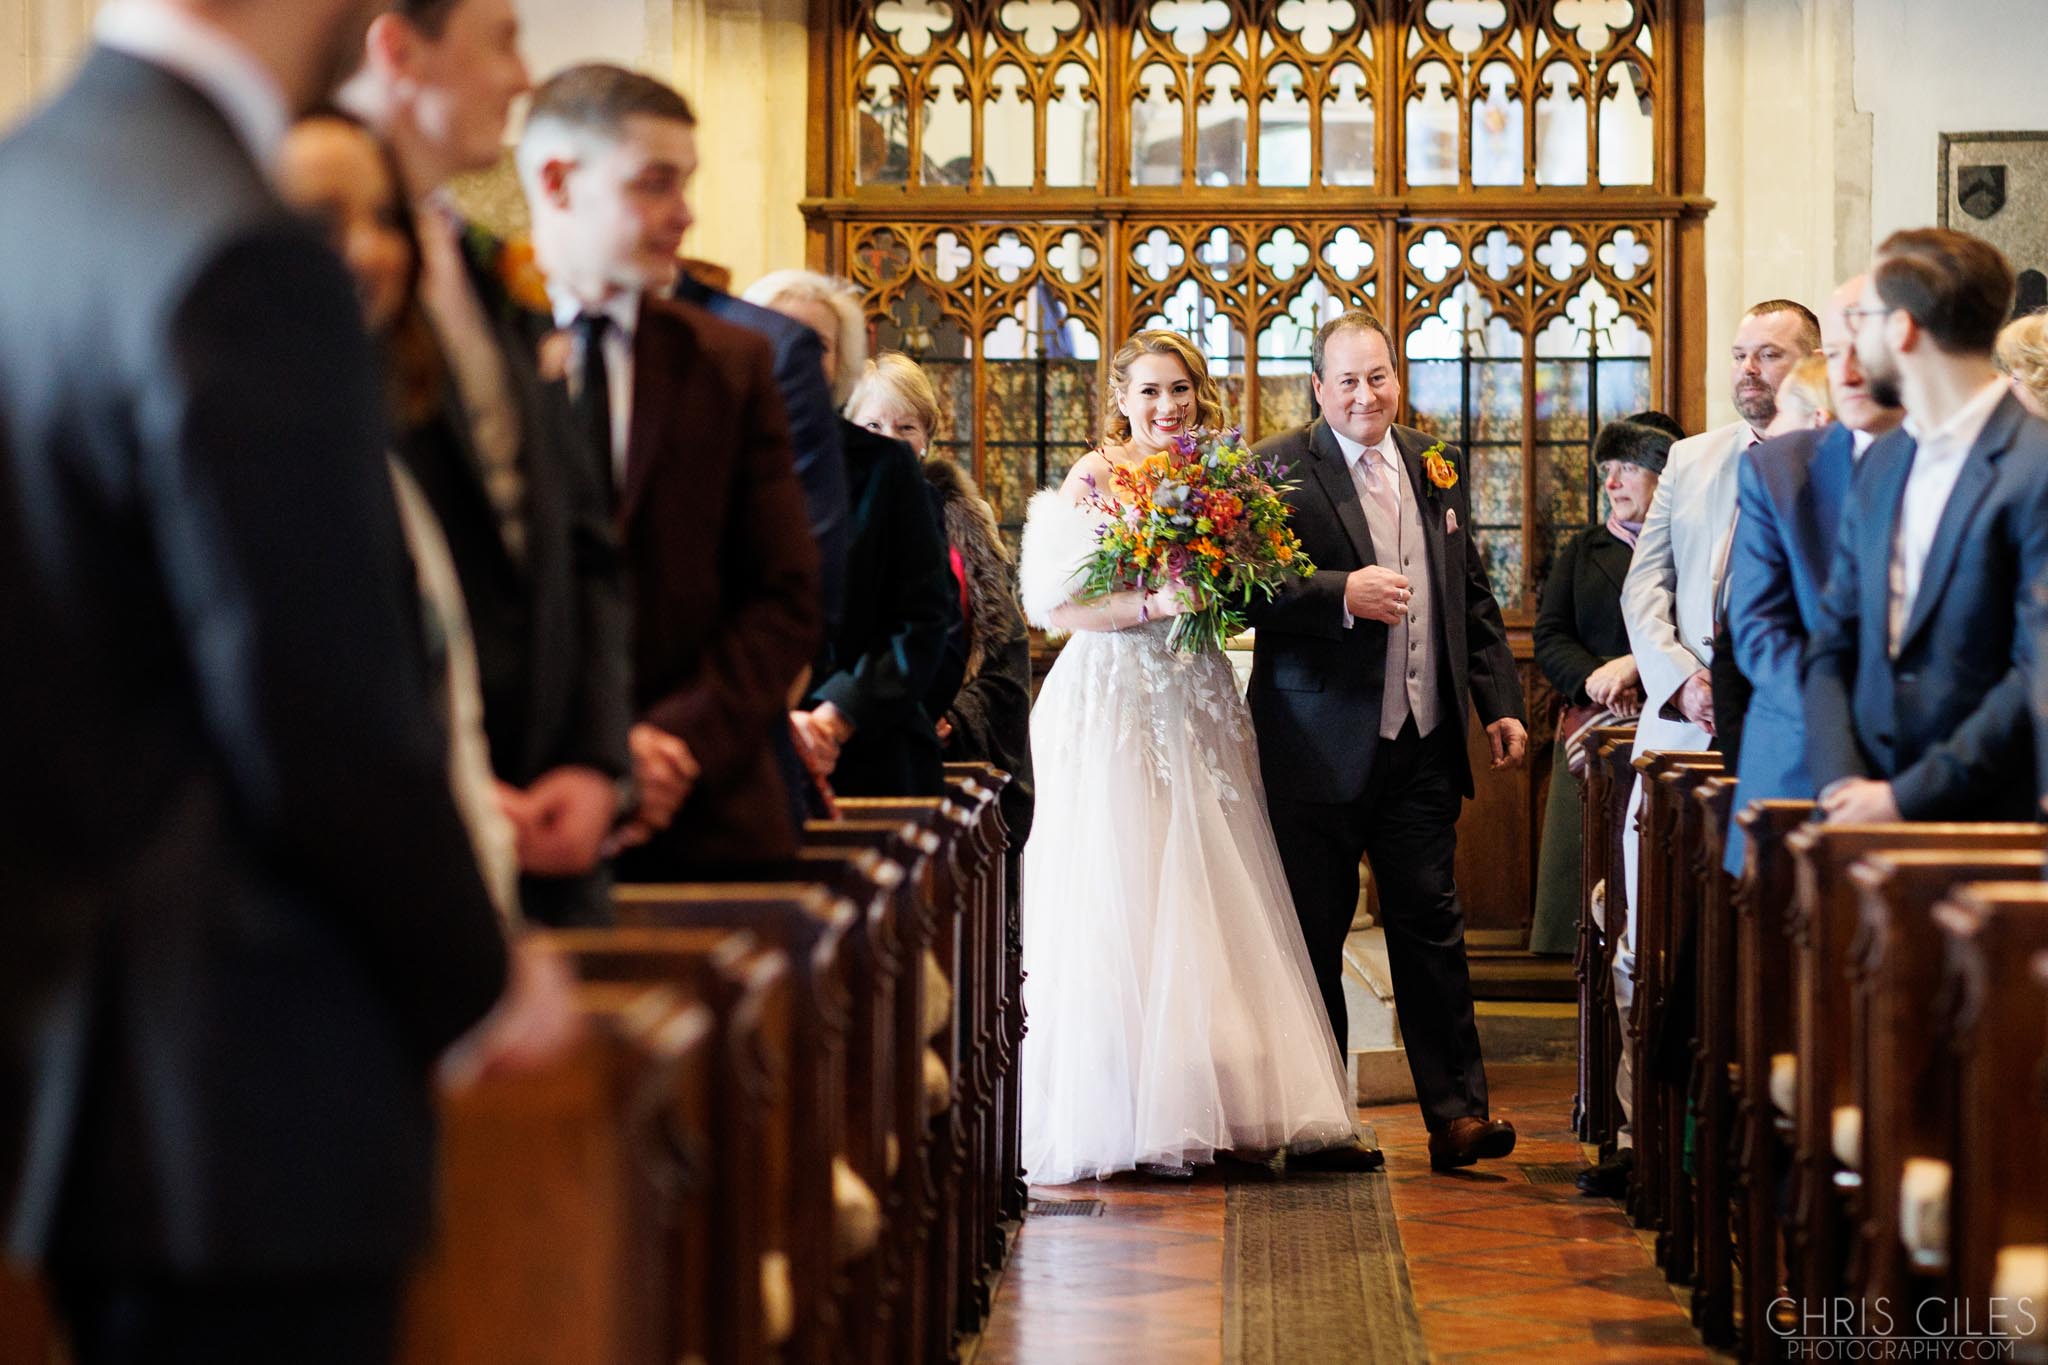 Wedding Ceremony at St Michael's Church in Chenies